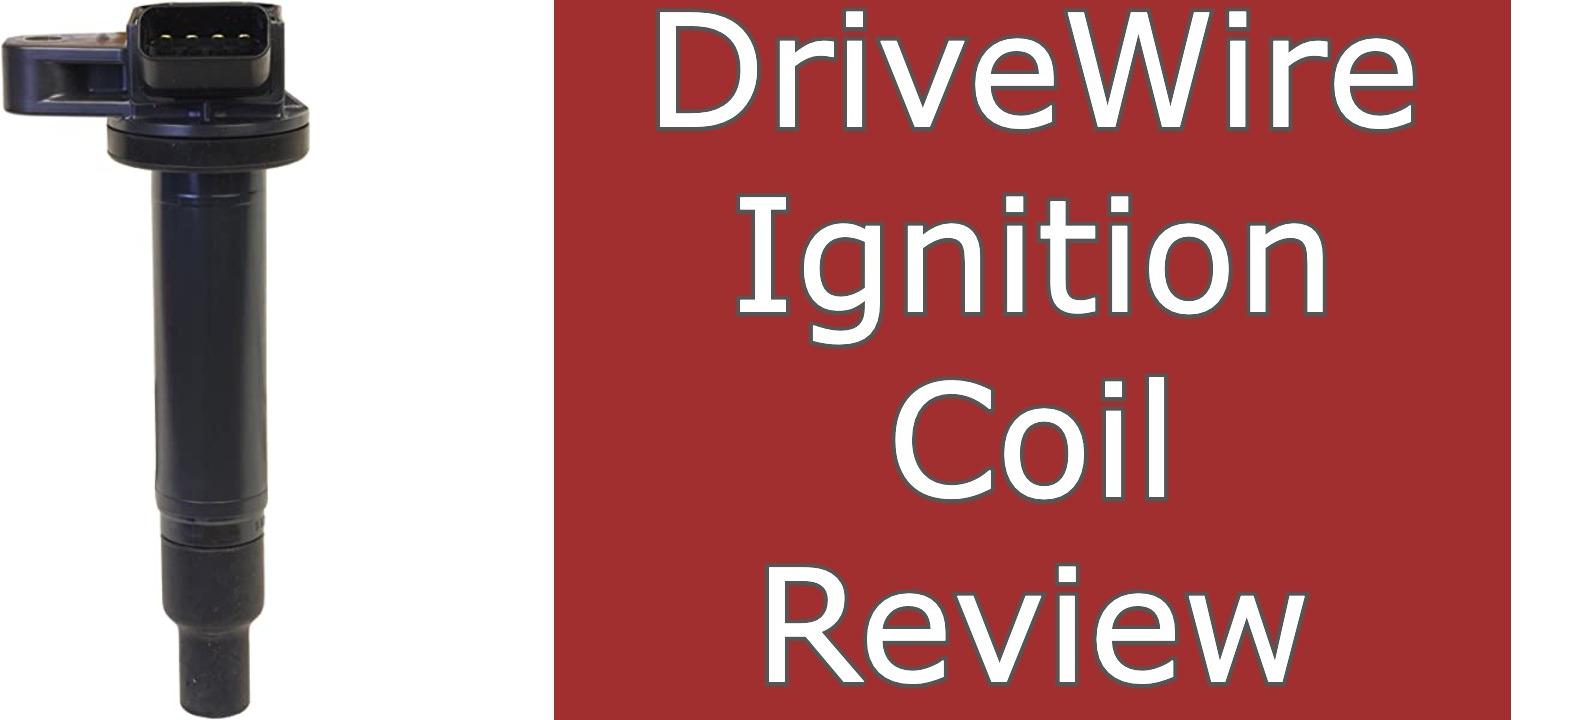 DriveWire Ignition Coil Review